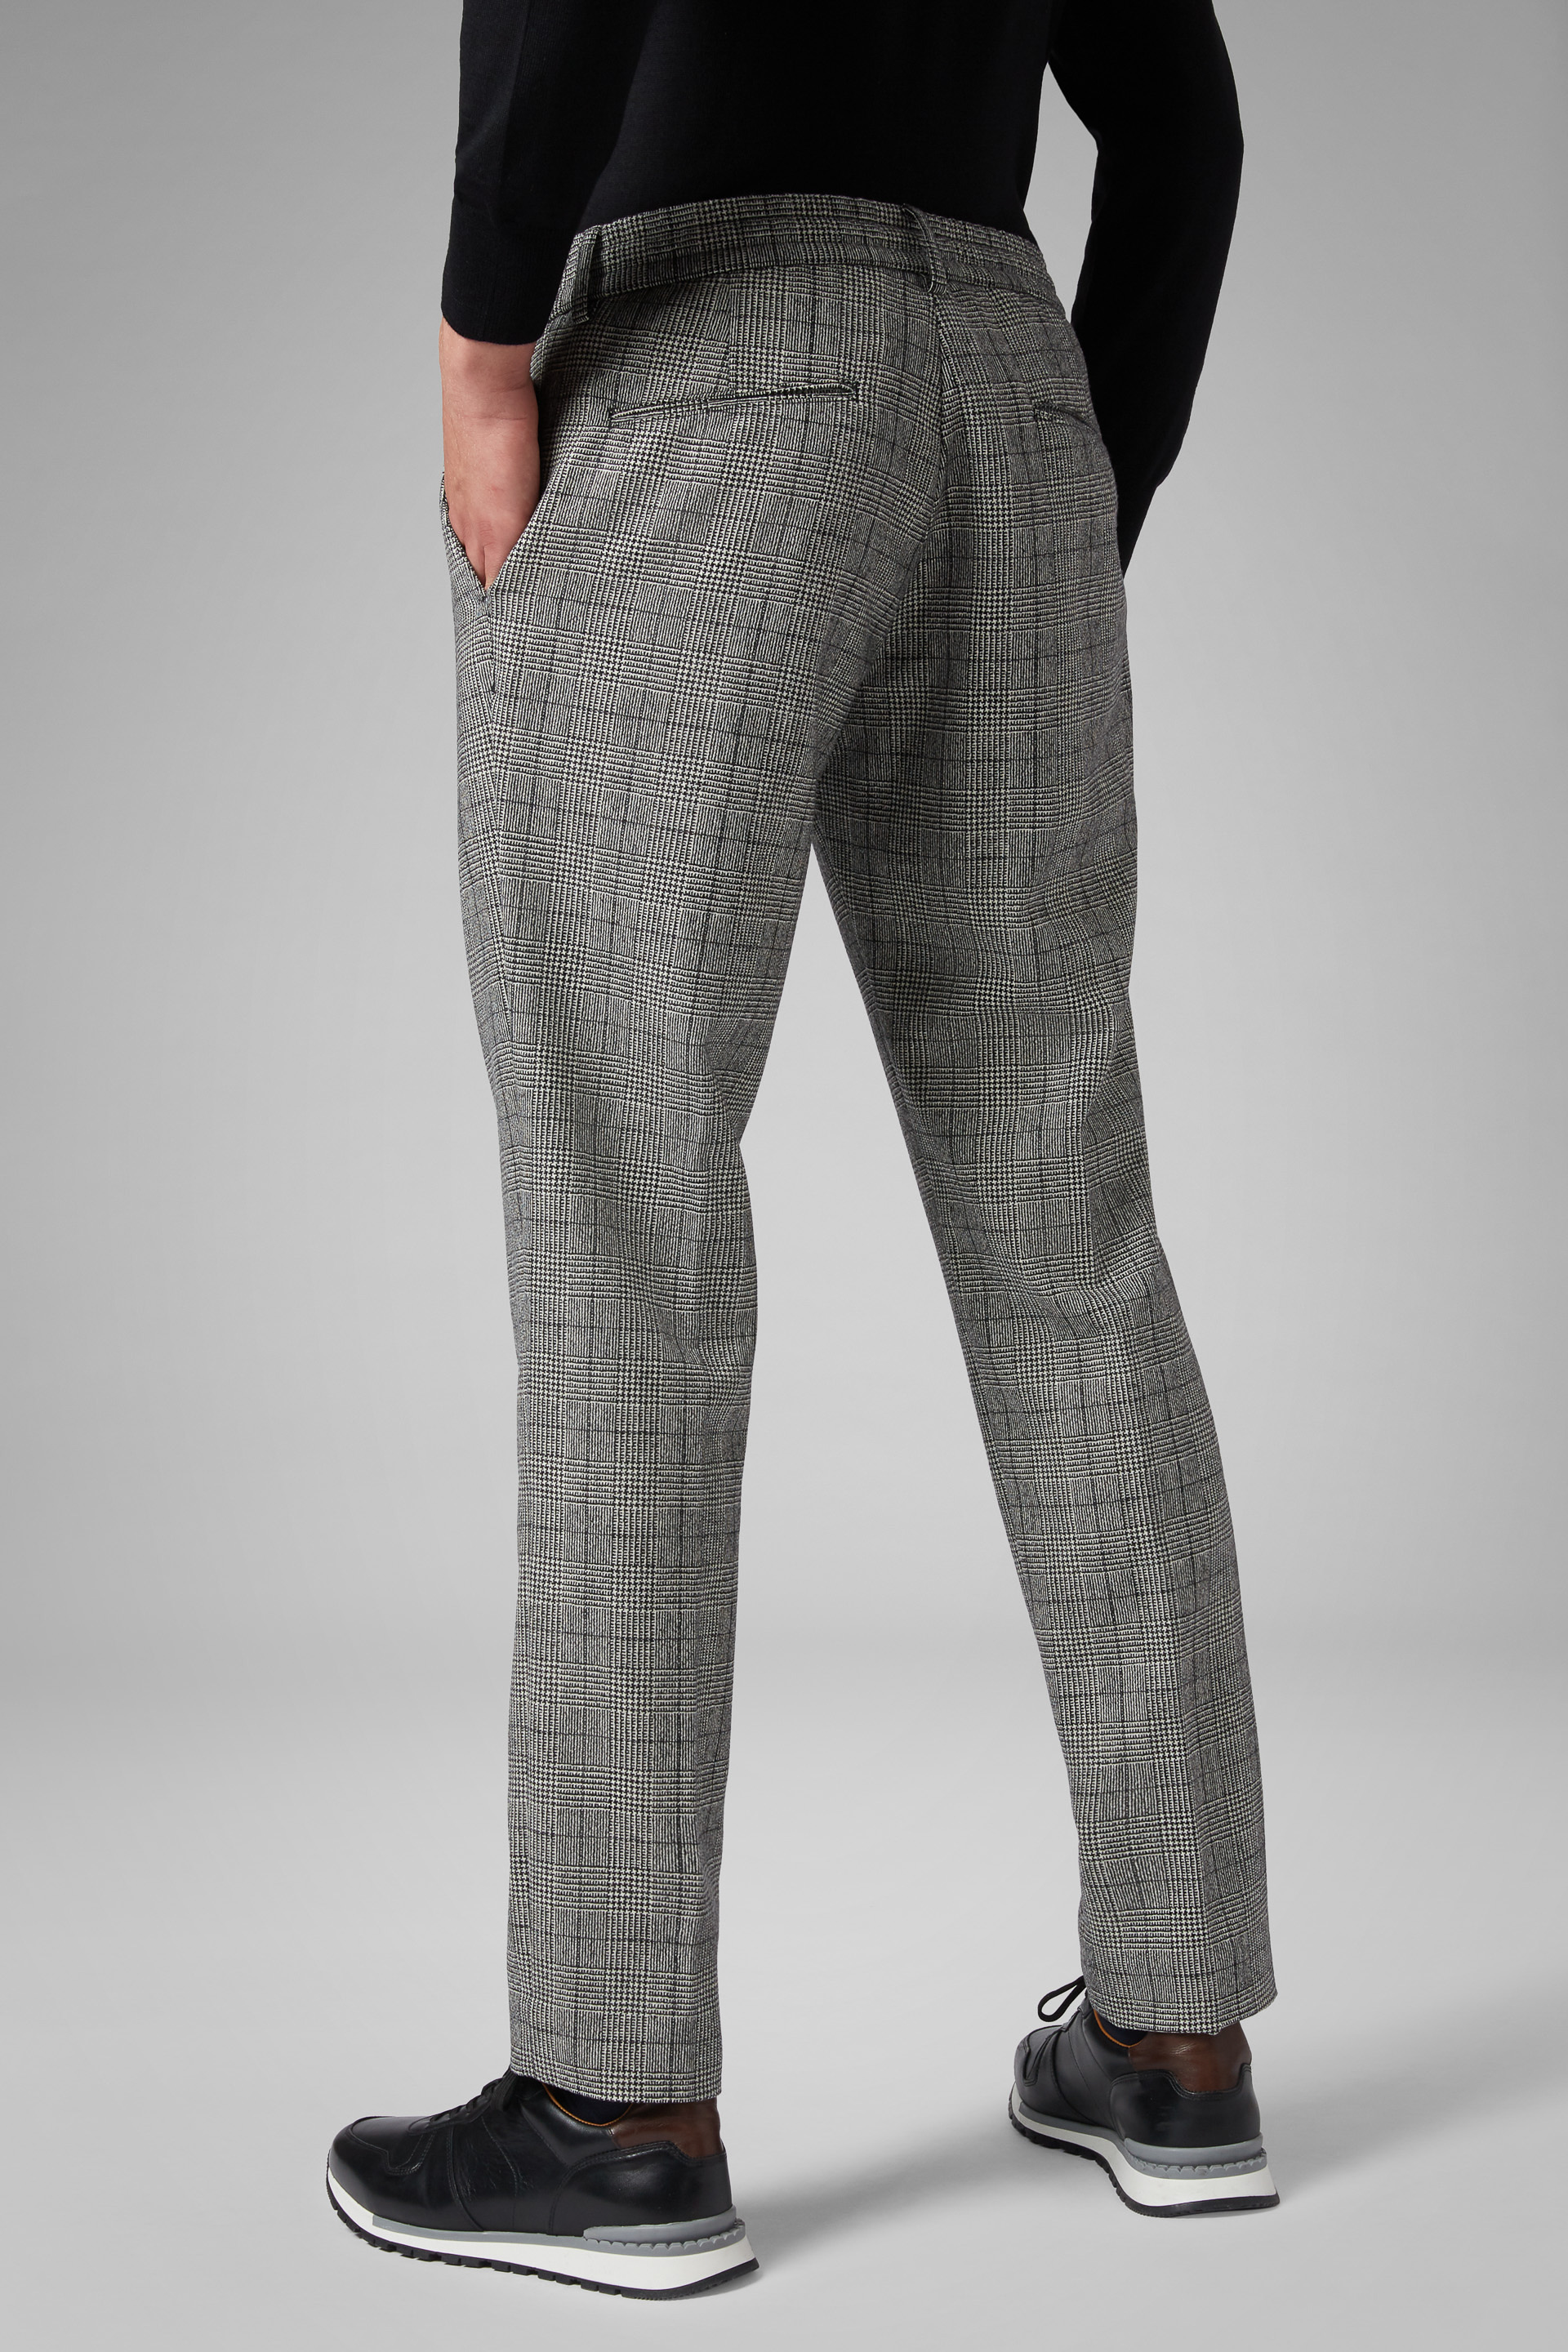 Buy Ultra Grey Trousers  Pants for Men by Richard Parker by Pantaloons  Online  Ajiocom